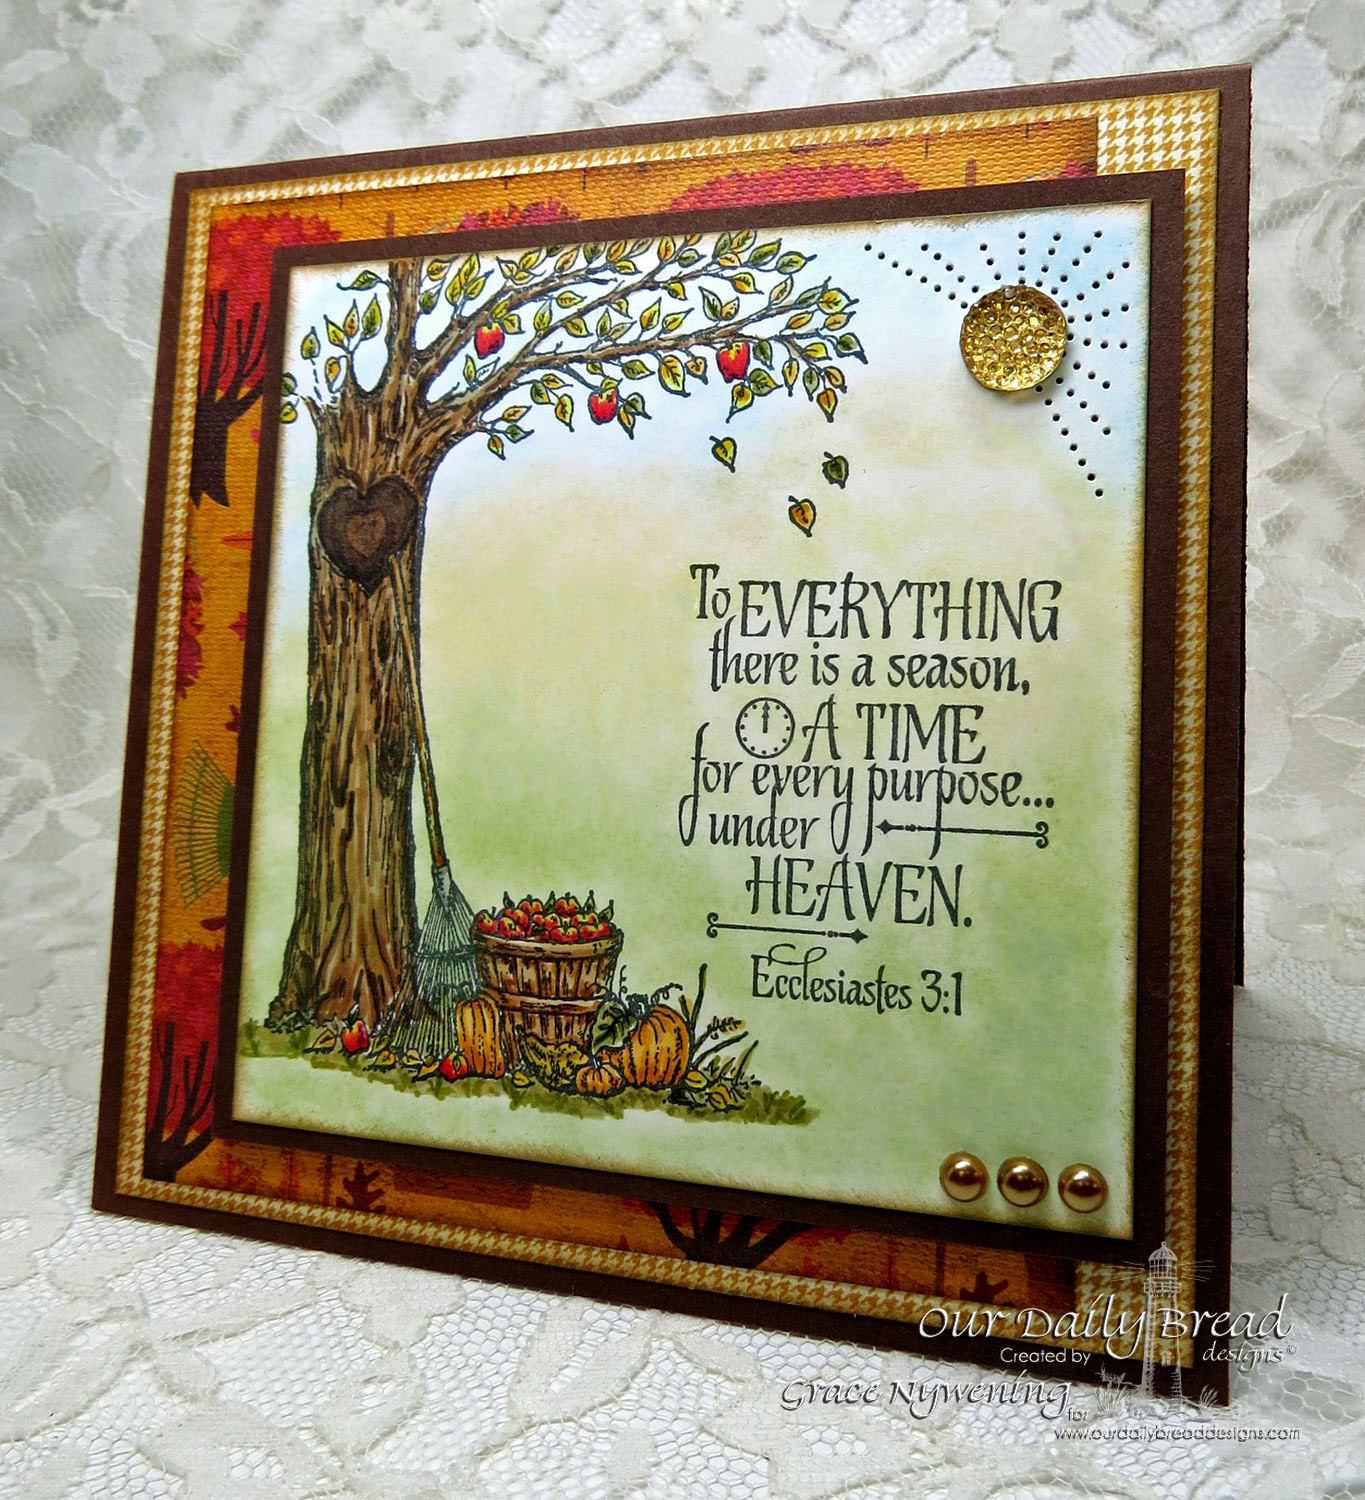 ODBD stamps: Autumn Tree, God's Timing, designed by Grace Nywening